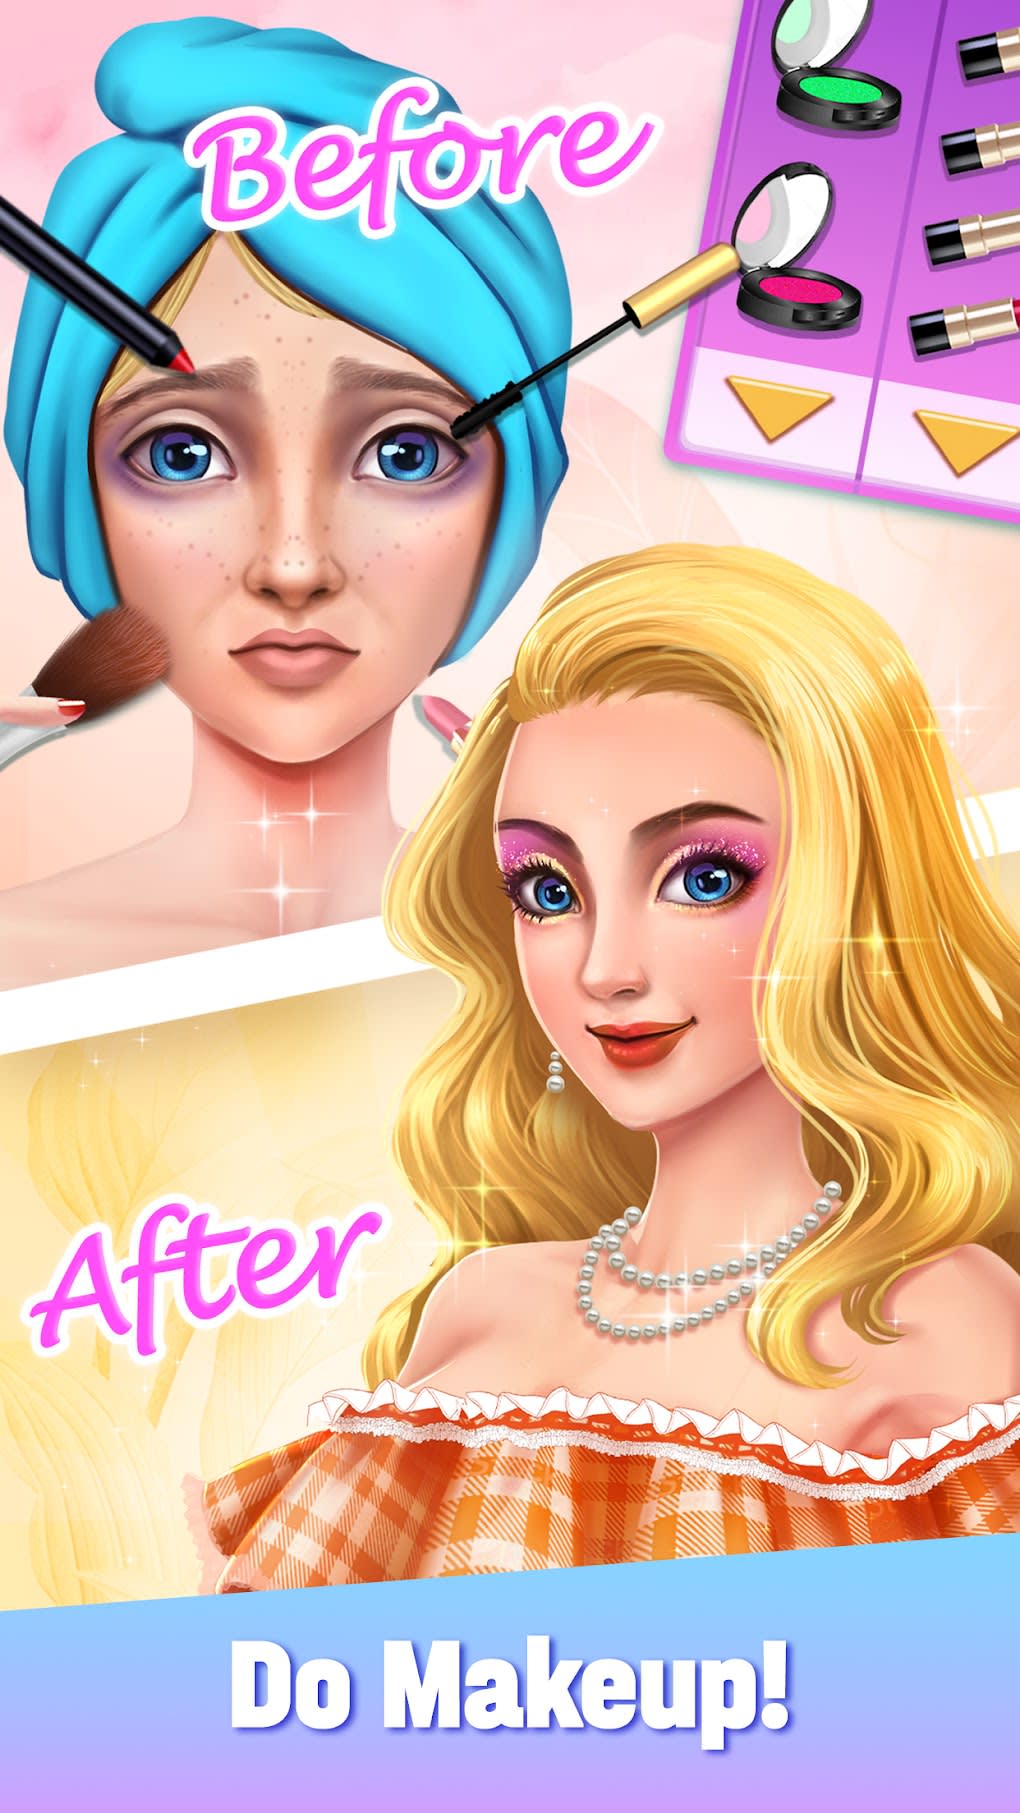 Download Fashion Dress Up Game For PC - EmulatorPC